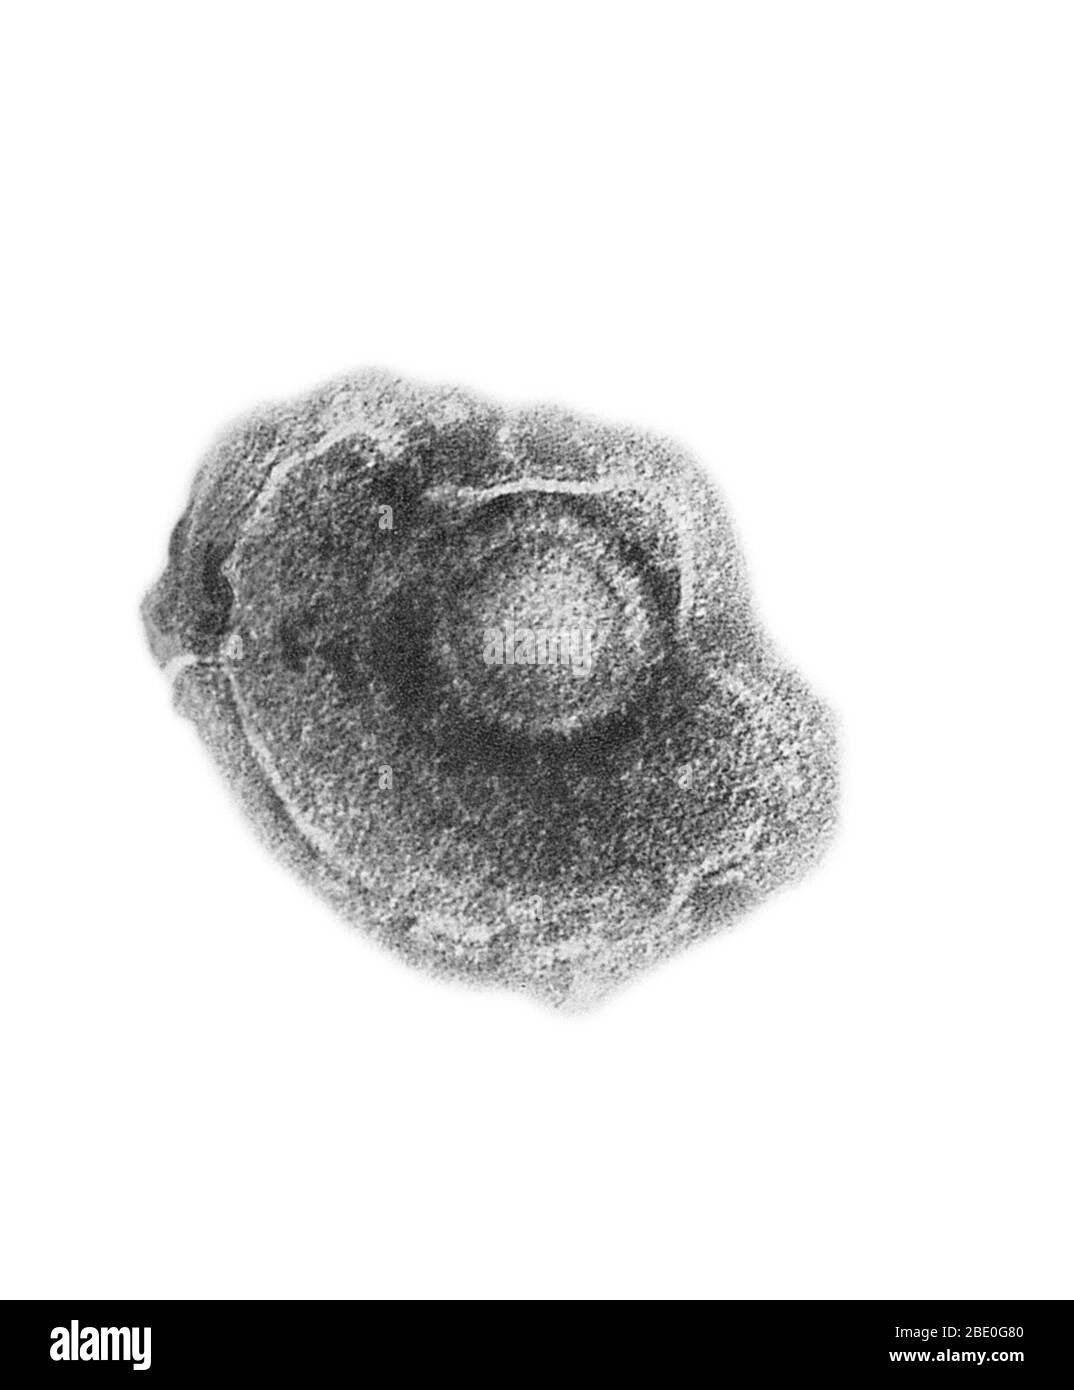 Transmission Electron Micrograph (TEM) of a Varicella zoster virus. Varicella zoster virus or varicella-zoster virus (VZV) is one of eight herpesviruses known to infect humans and vertebrates. VZV only affects humans, and commonly causes chickenpox in children, teens and young adults and herpes zoster (shingles) in adults and rarely in children. VZV is known by many names, including chickenpox virus, varicella virus, zoster virus, and human herpesvirus type 3 (HHV-3). VZV multiplies in the lungs, and causes a wide variety of symptoms. After the primary infection (chickenpox), the virus goes do Stock Photo